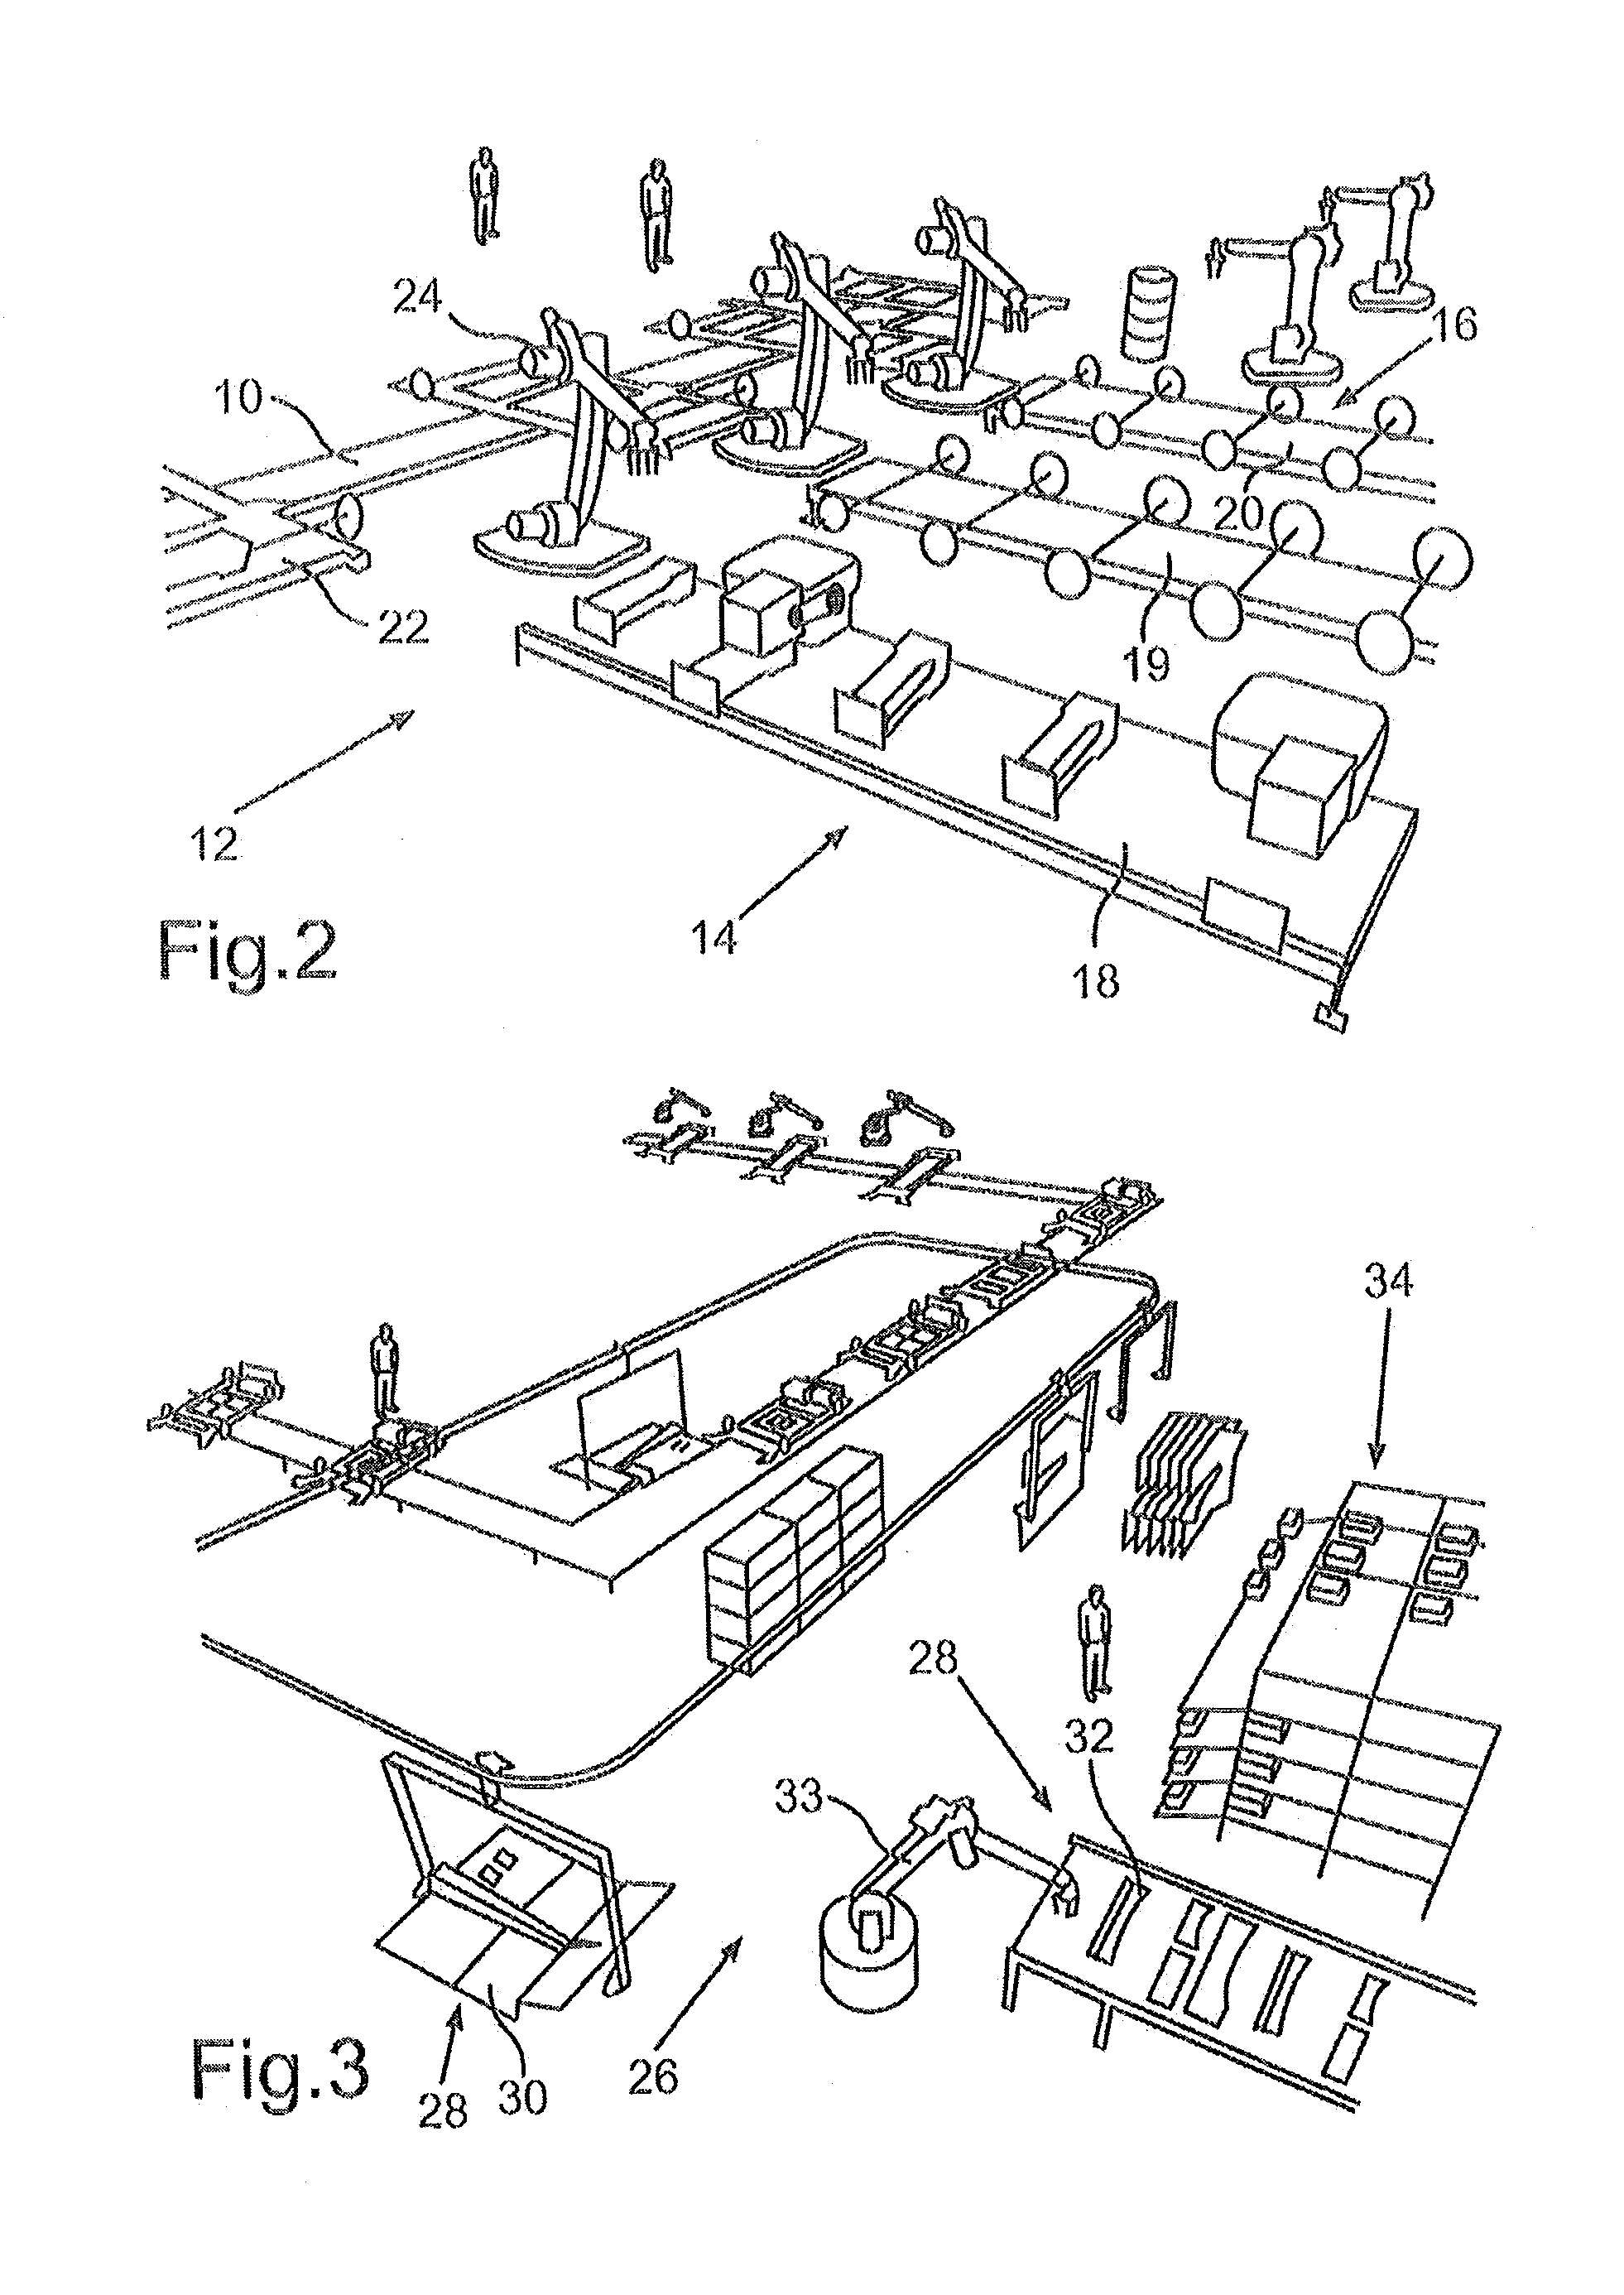 Method for Fitting Motor Vehicle Suspension Systems